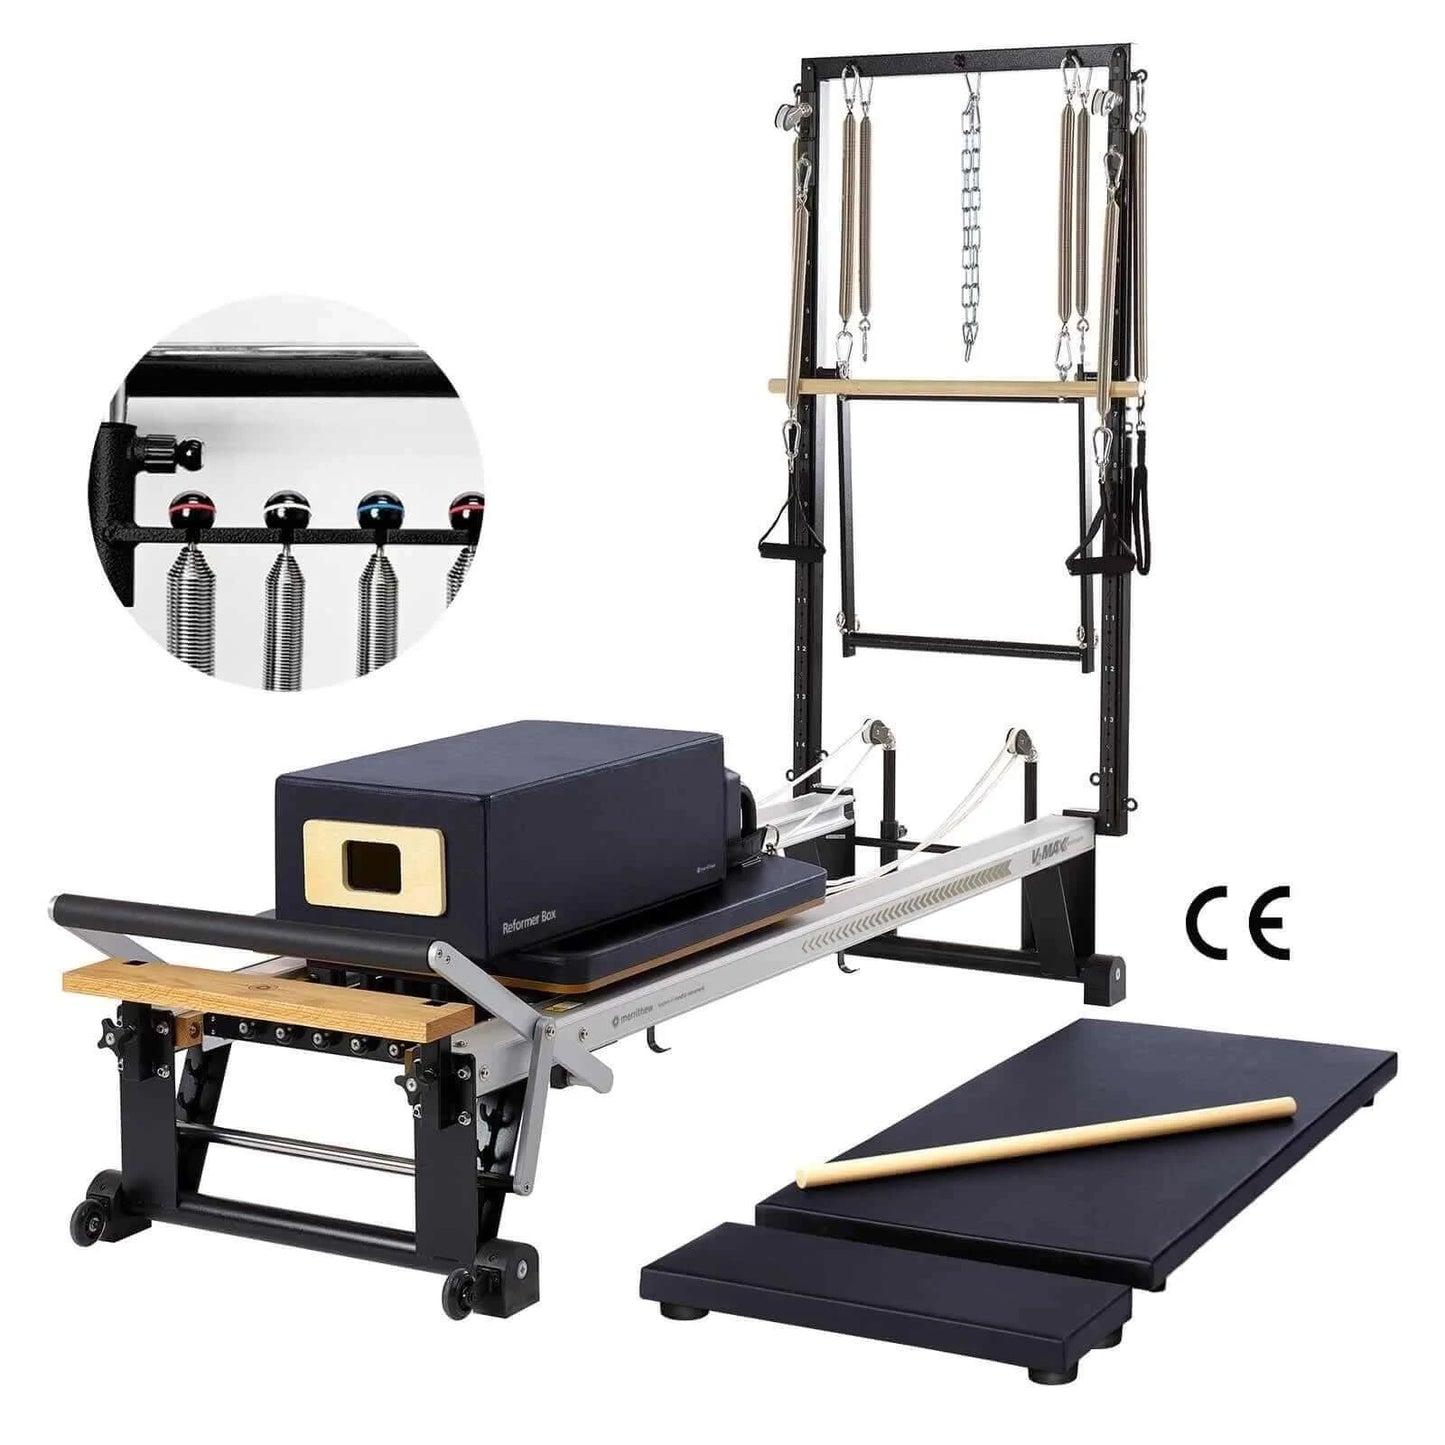 Eclipse Merrithew™ Pilates V2 Max Plus™ Reformer Bundle with HPGB by Merrithew™ sold by Pilates Matters® by BSP LLC